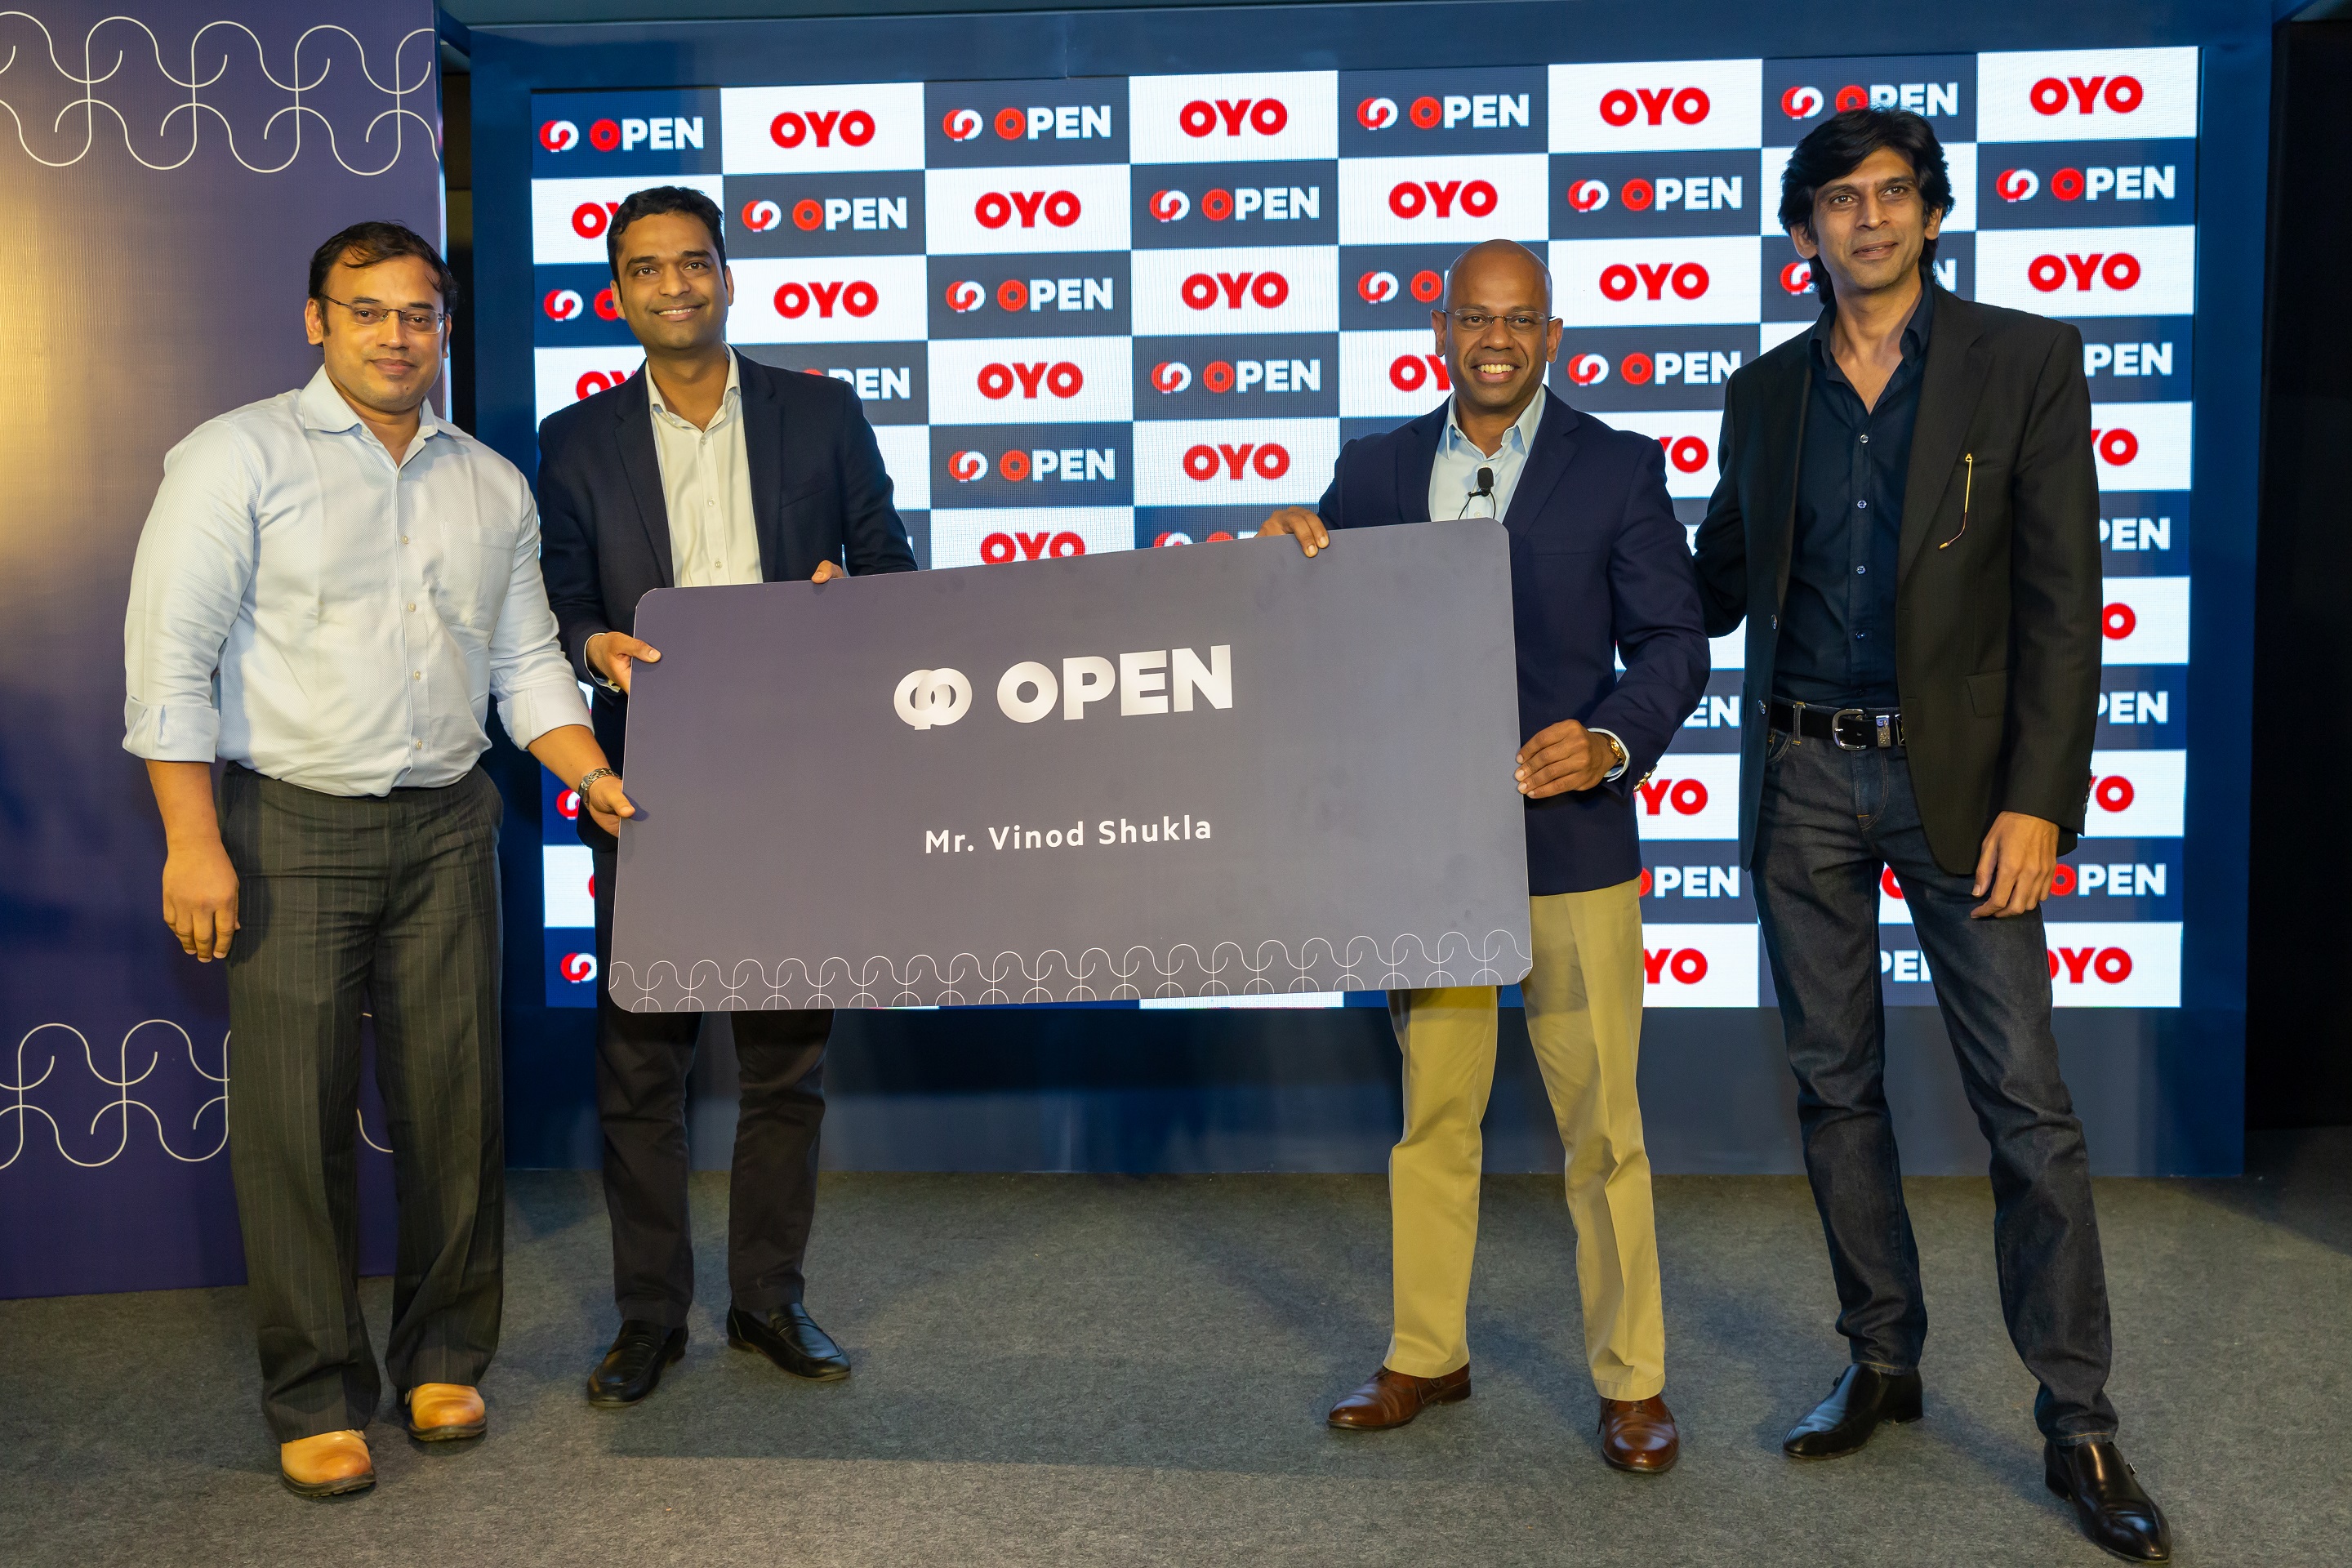 L to R - Mr Vinod Shukla, OYO Hotel owner, Mr Ayush Mathur, Chief Supply Officer at OYO Hotels & Homes, Anup Shetty, OYO Hotel owner Aditya Ghosh, CEO - India & South Asia, OYO Hotels & Homes - Photo By Sachin Murdeshwar / GPN 